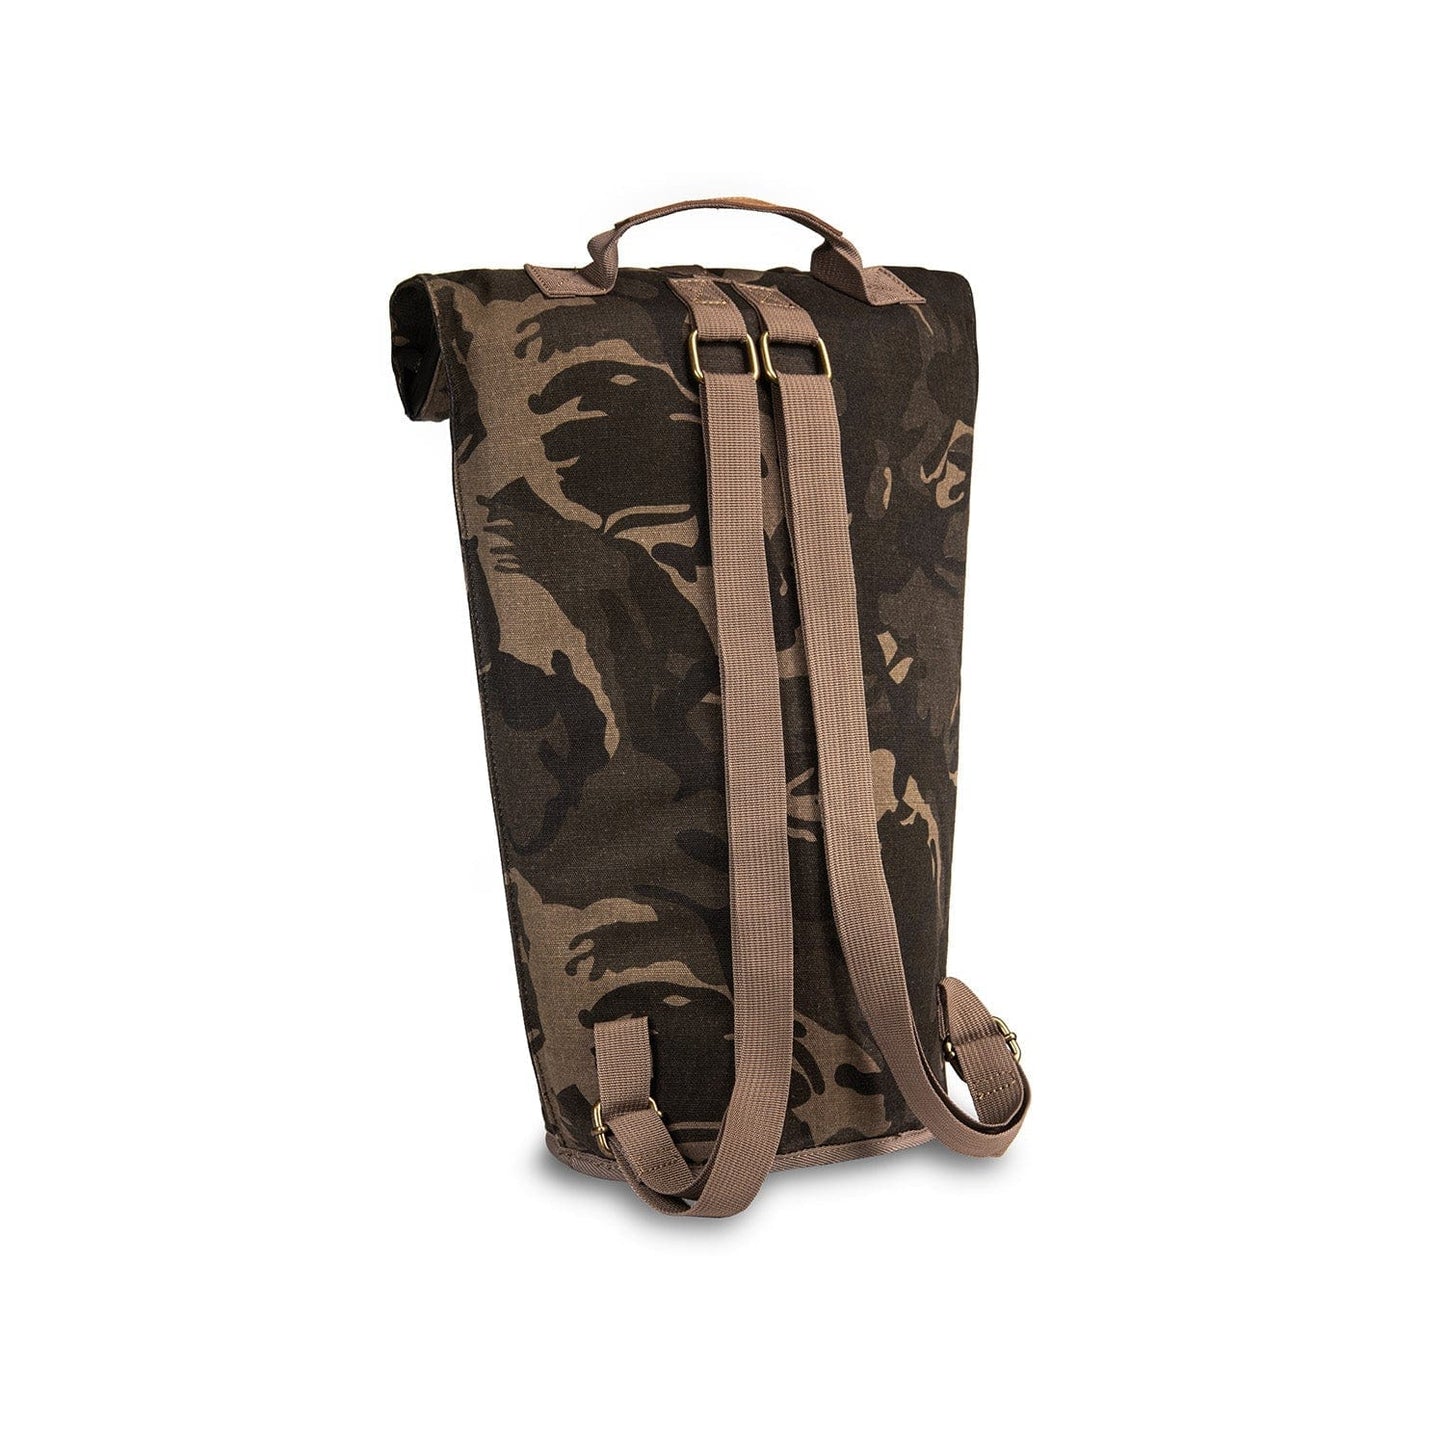 Revelry Supply The Defender - Smell Proof Padded Backpack